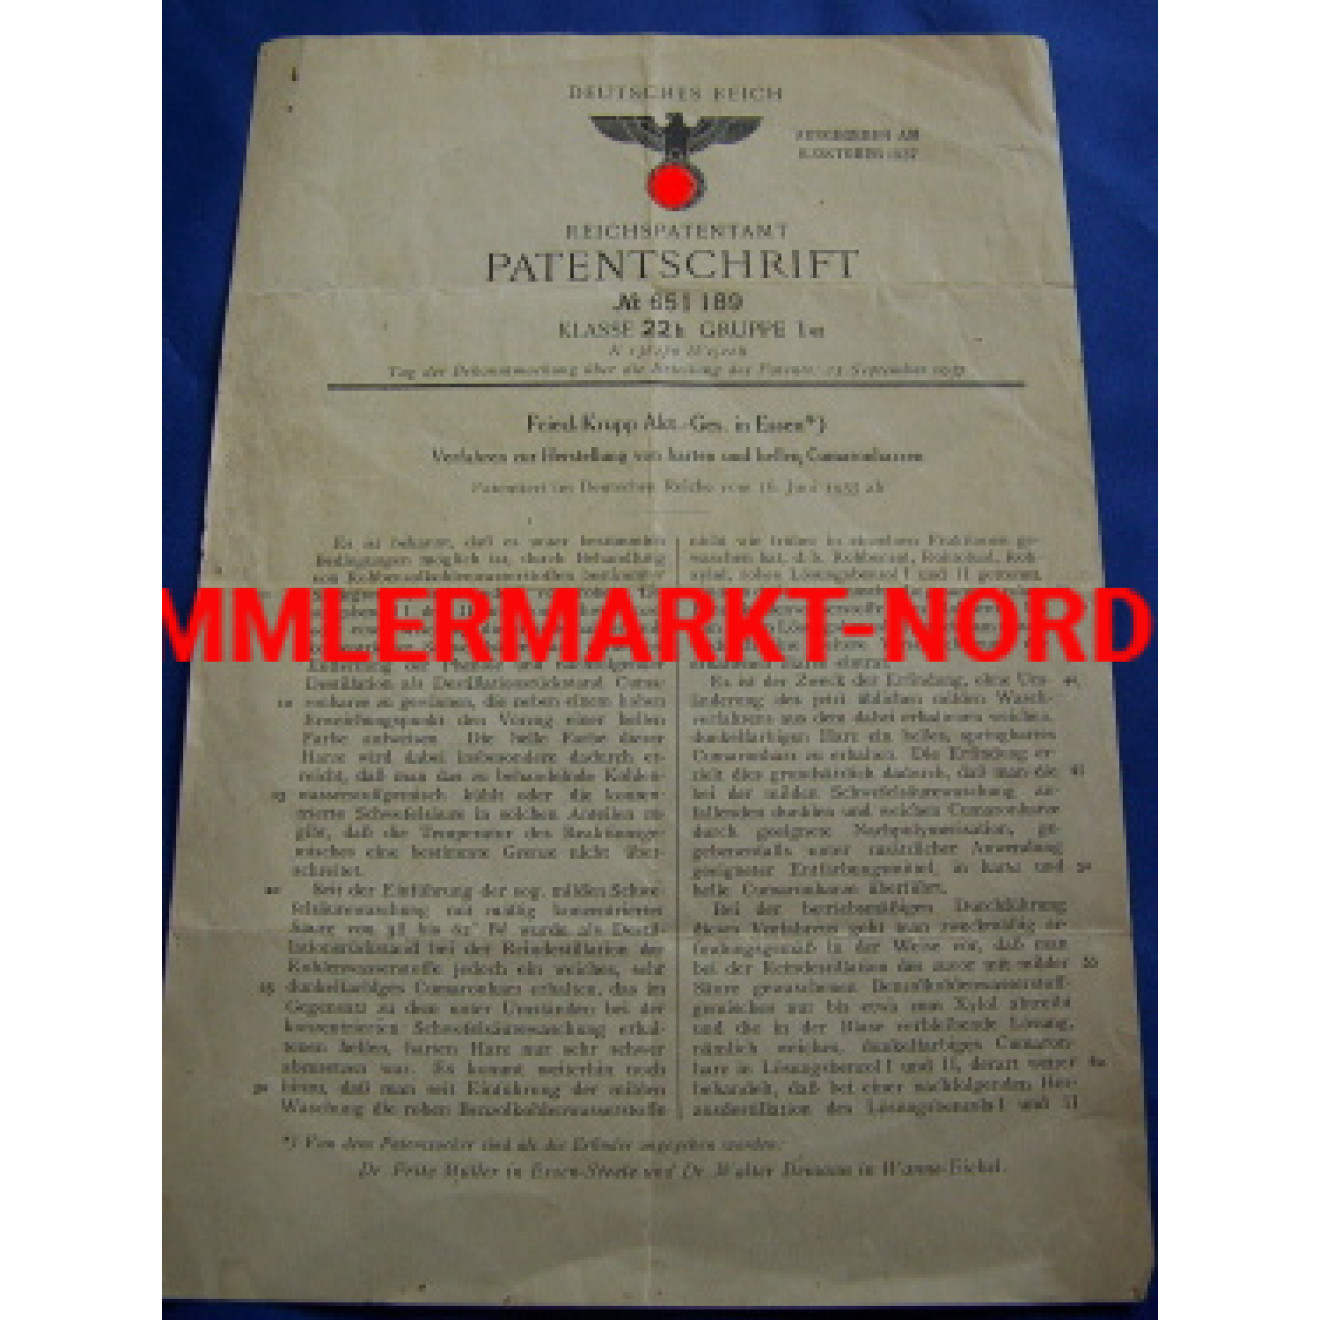 Patent specification of 1937